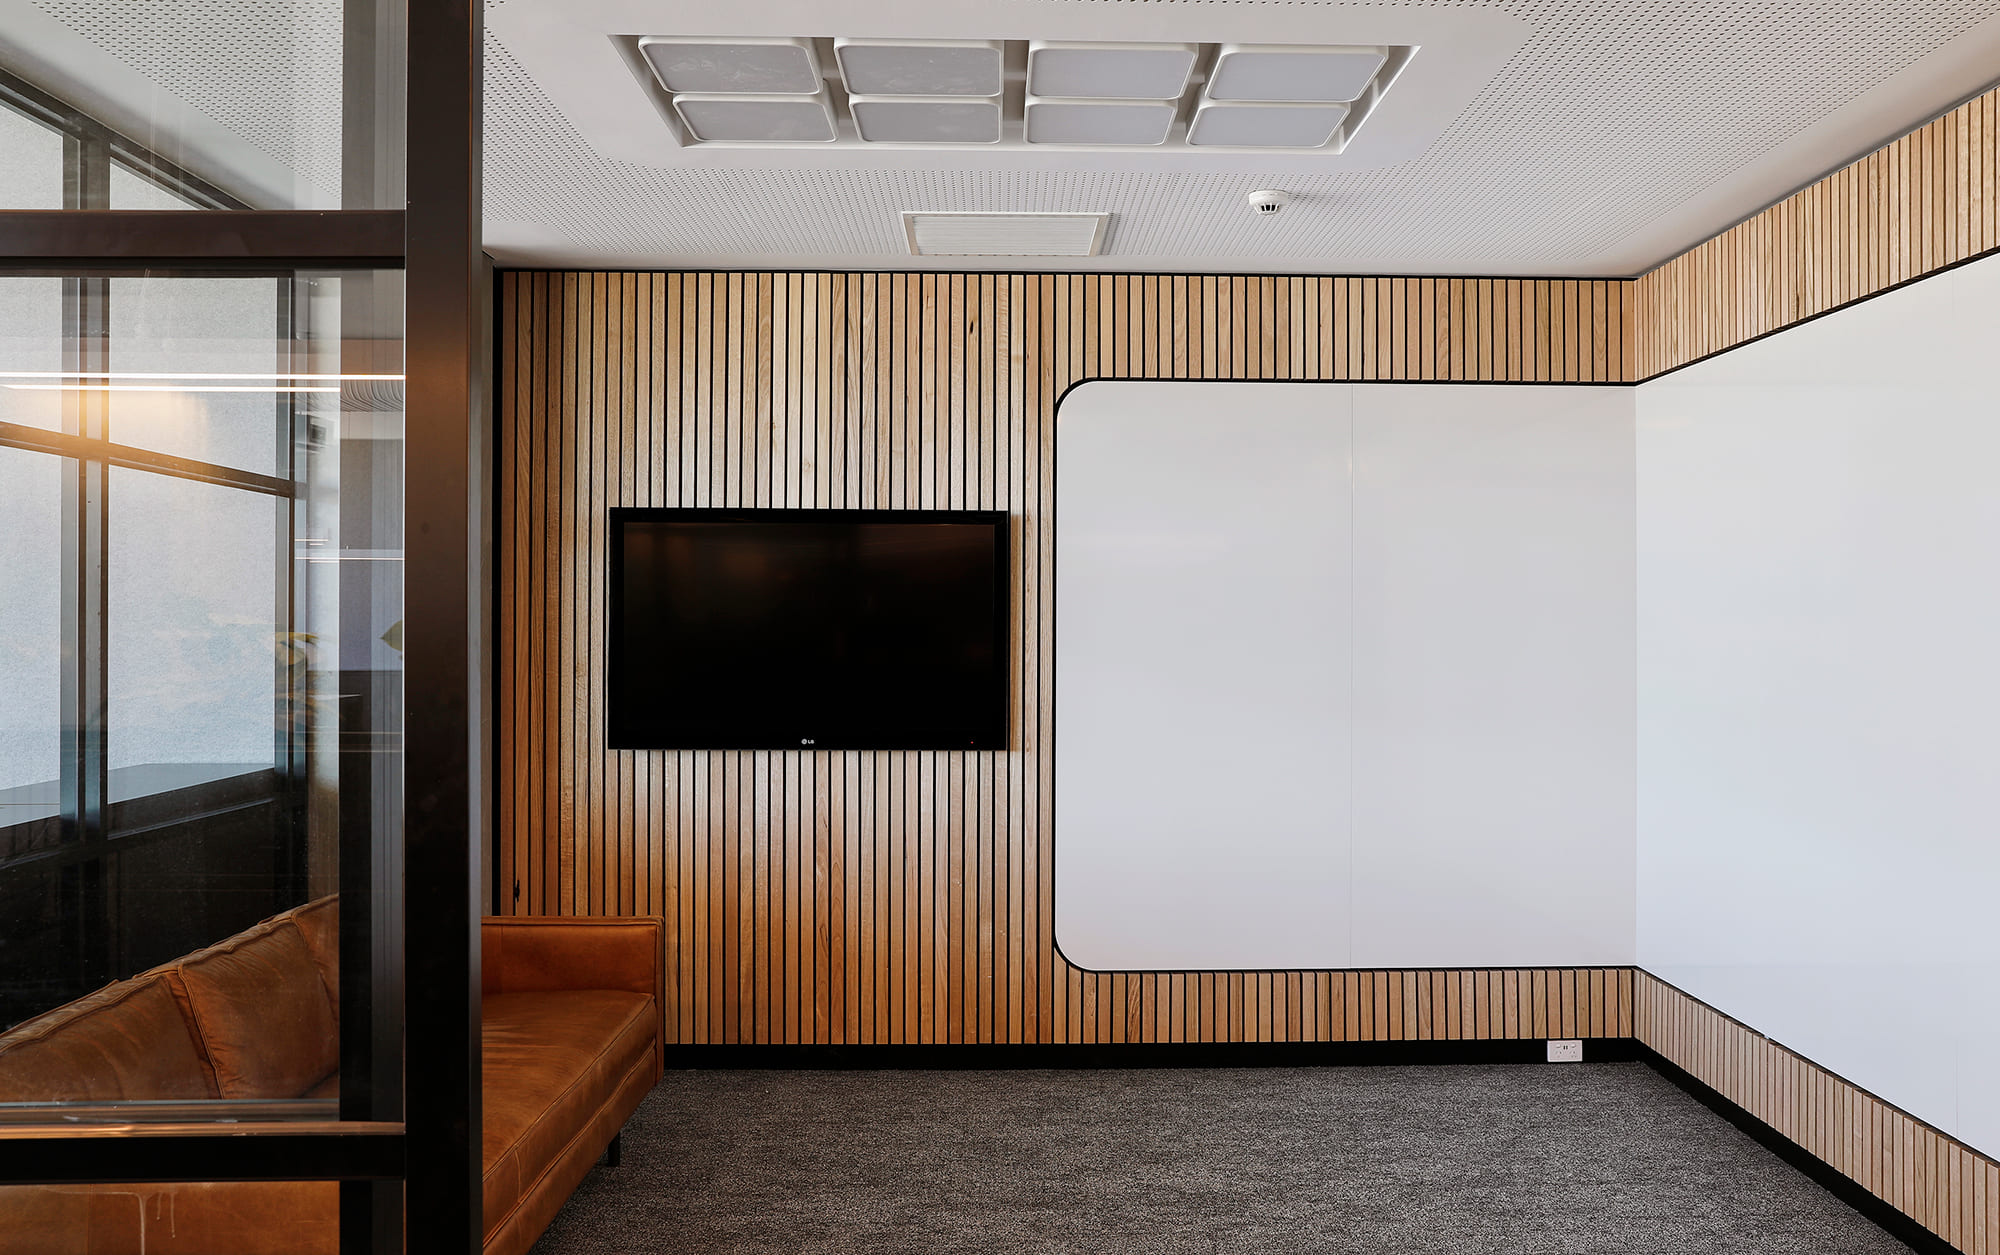 Room with TV, wall-size whiteboard, couch and glass walls